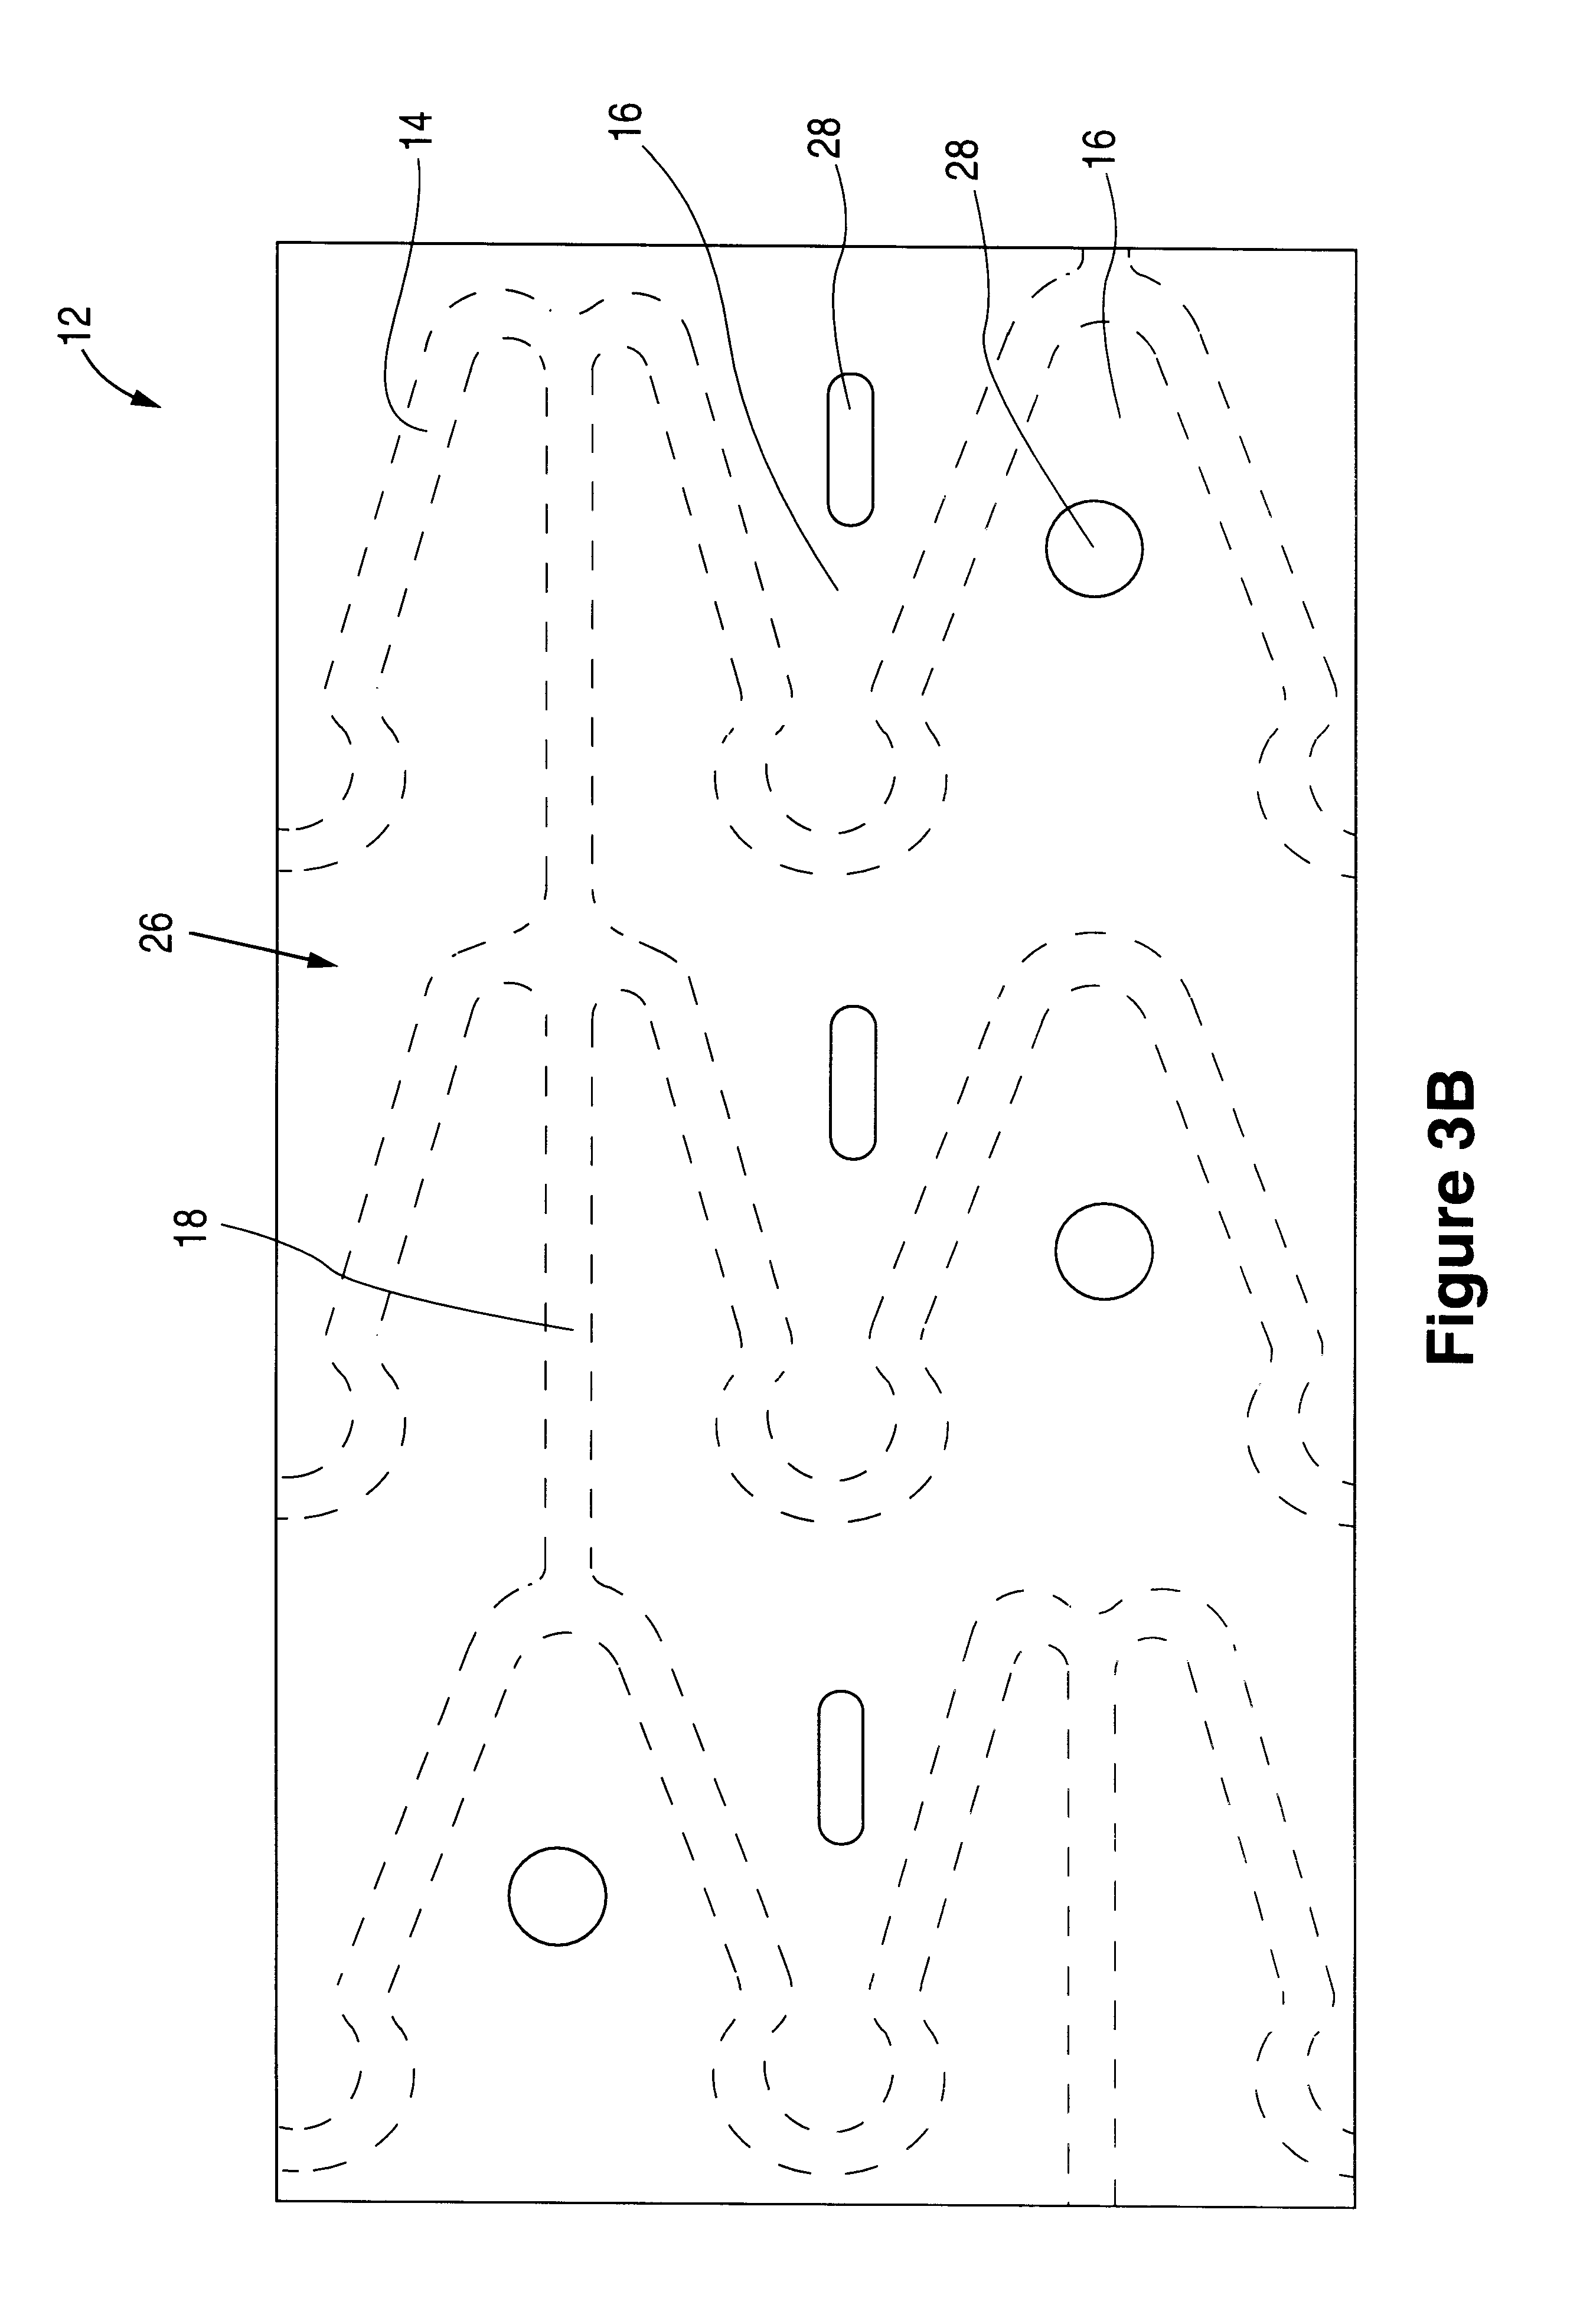 Sheath for a prosthesis and methods of forming the same